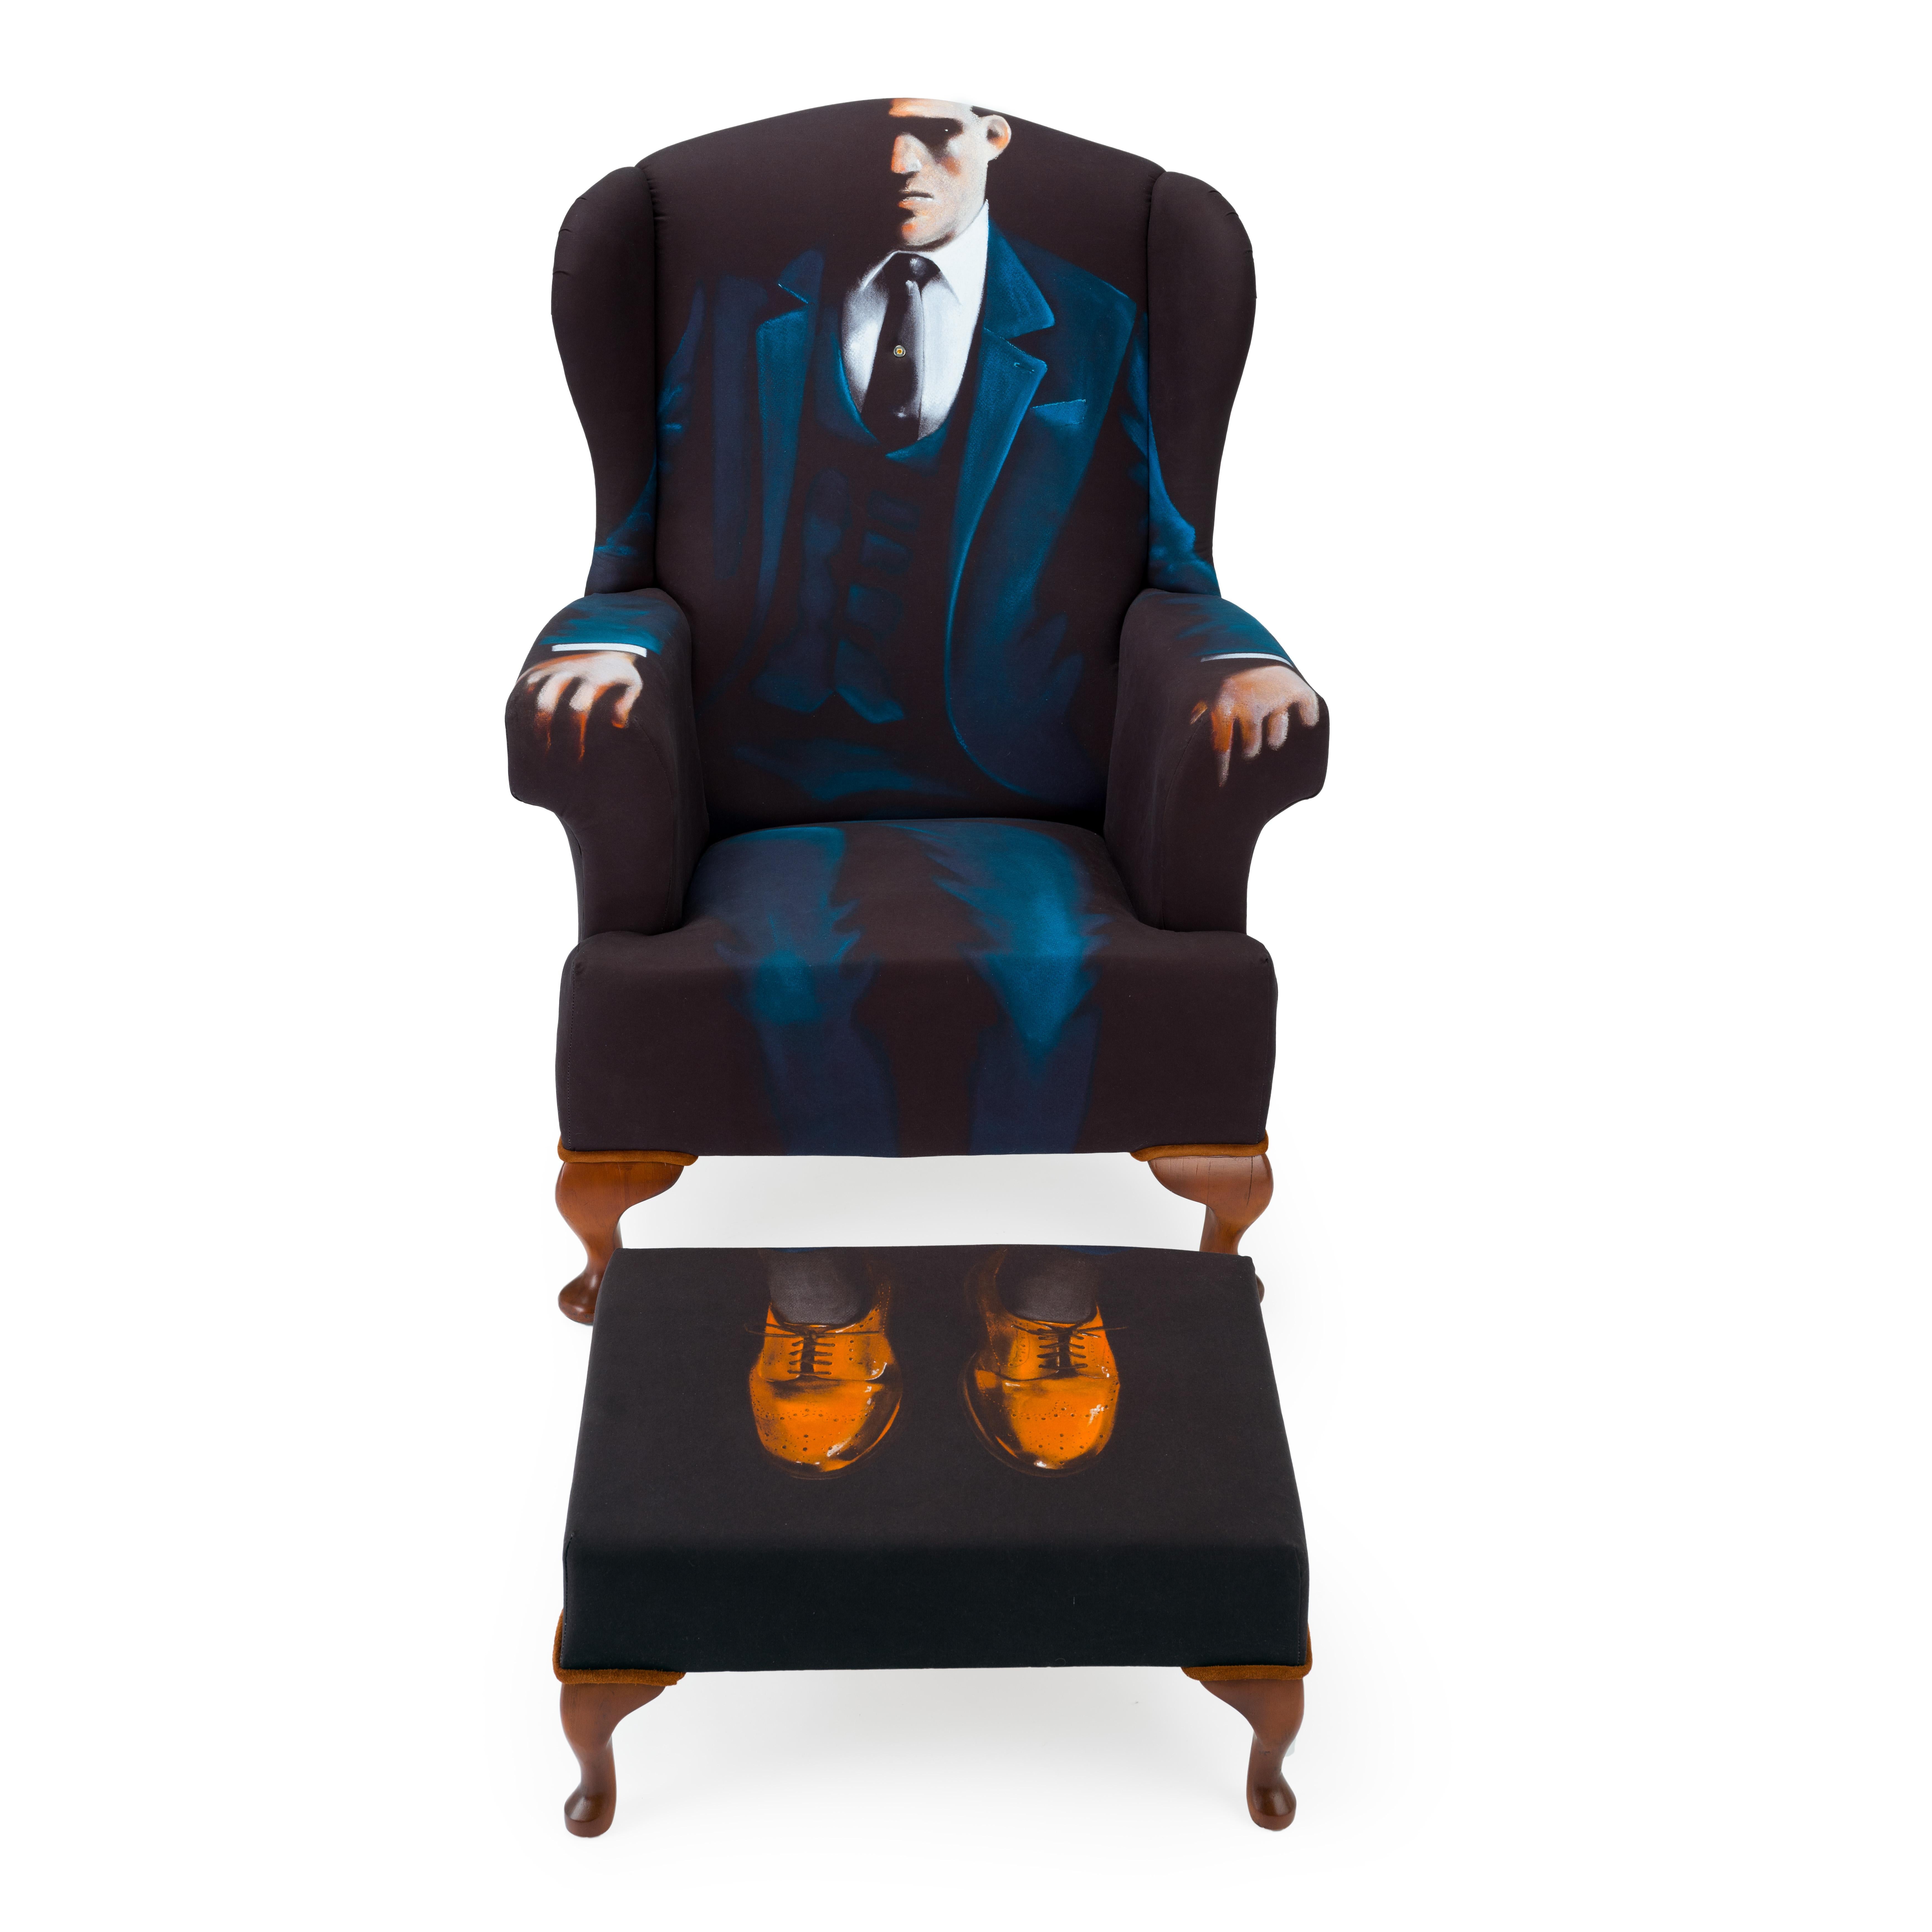 Mid-Century Modern Midcentury Wing Back Armchair 'the Mafia Boss’  Bespoke Unique One of a Kind